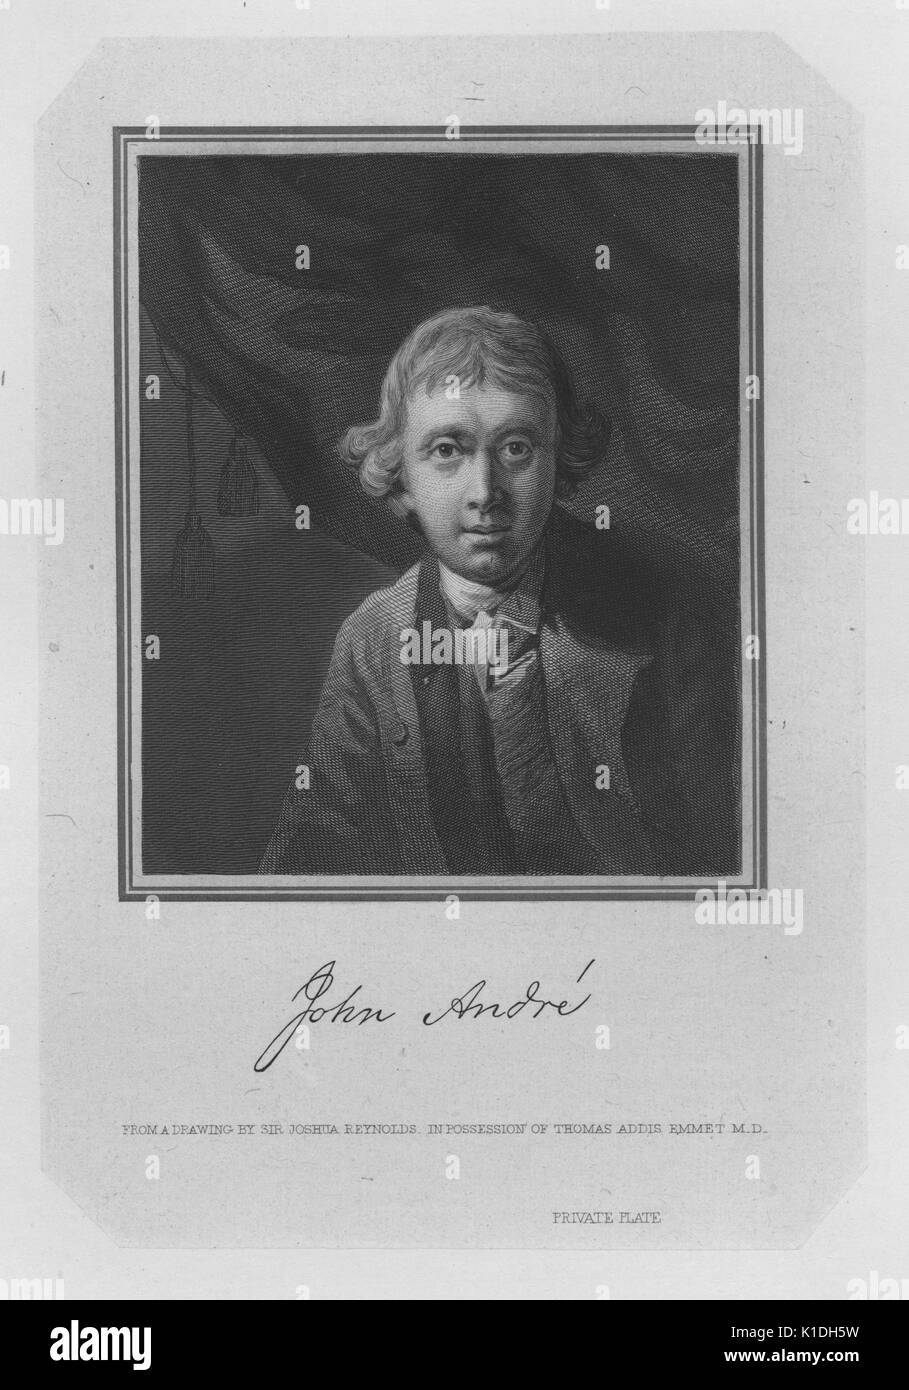 John Andre, British officer hanged during the Revolutionary War for assisting Benedict Arnold, 1900. From the New York Public Library. Stock Photo